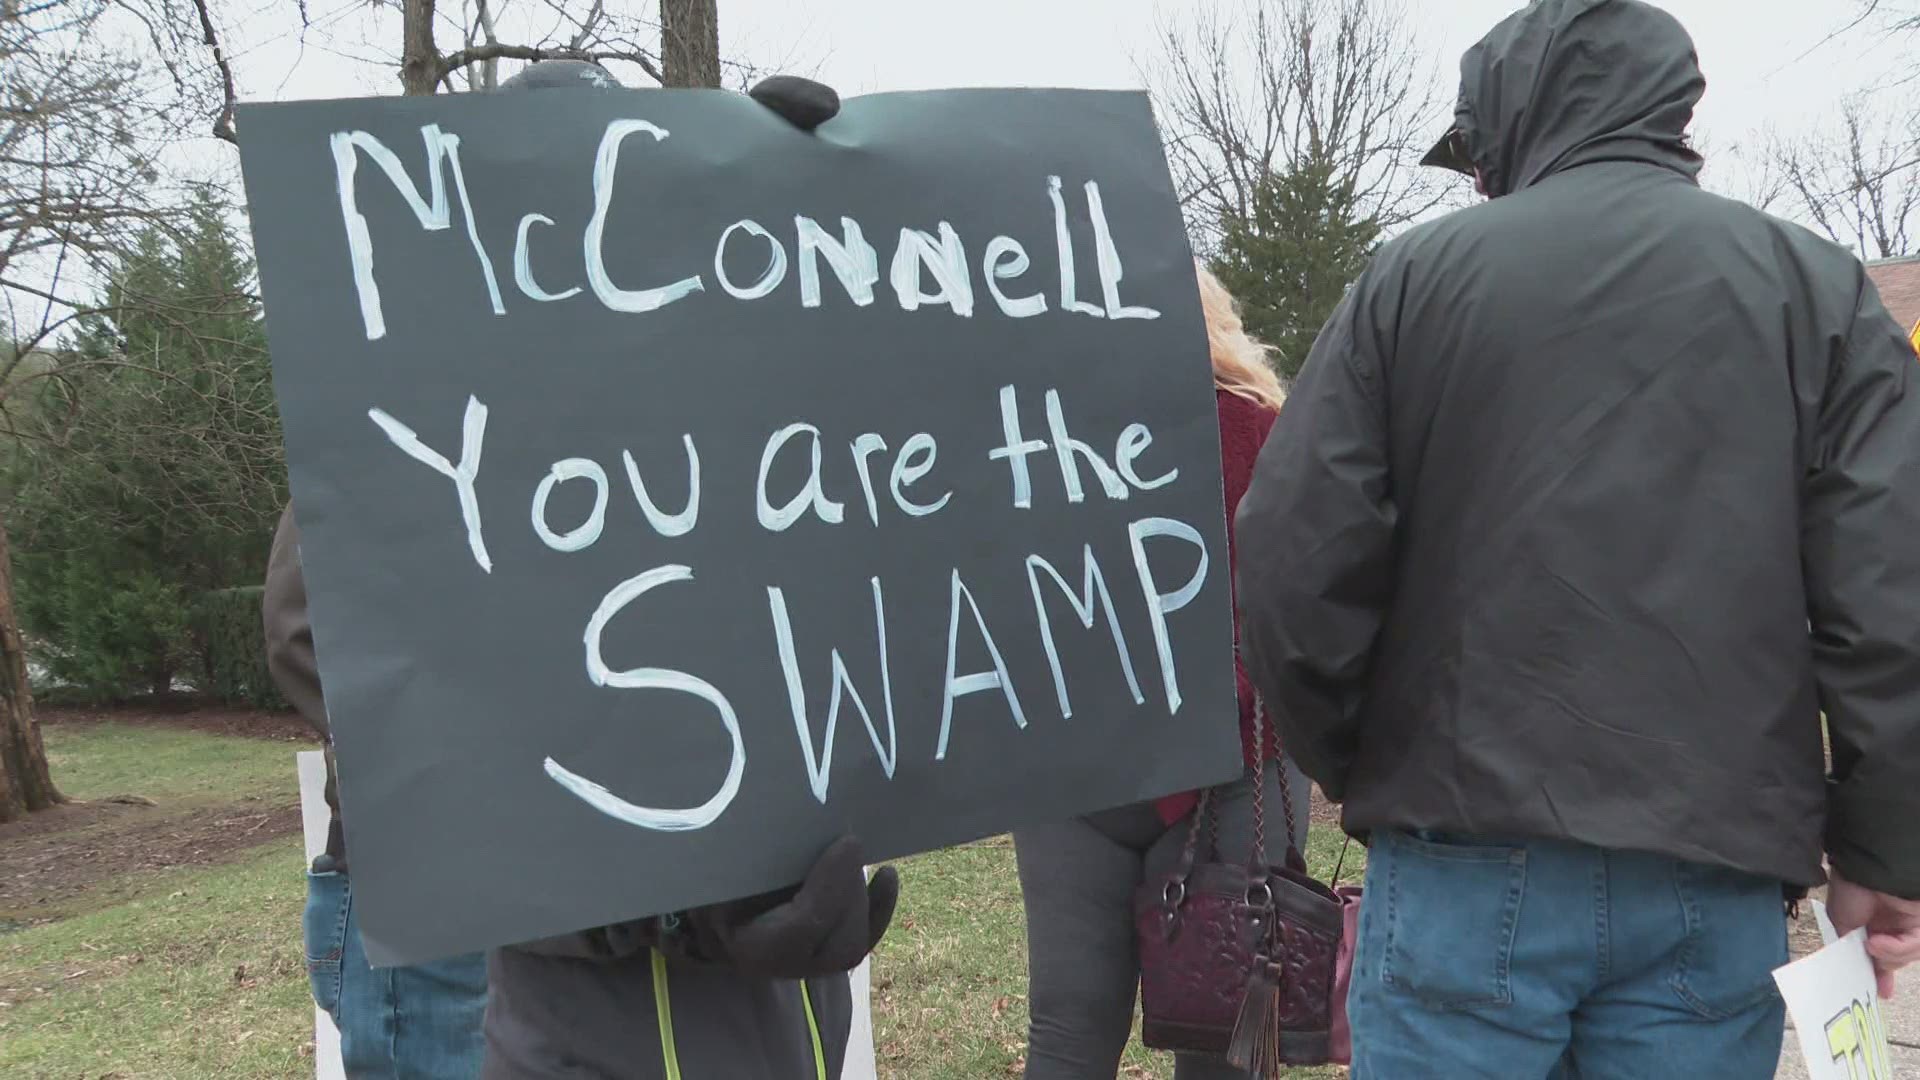 Hours after the front of his Highlands home was vandalized, protesters gathered to discuss the 2020 election and the stimulus bill.